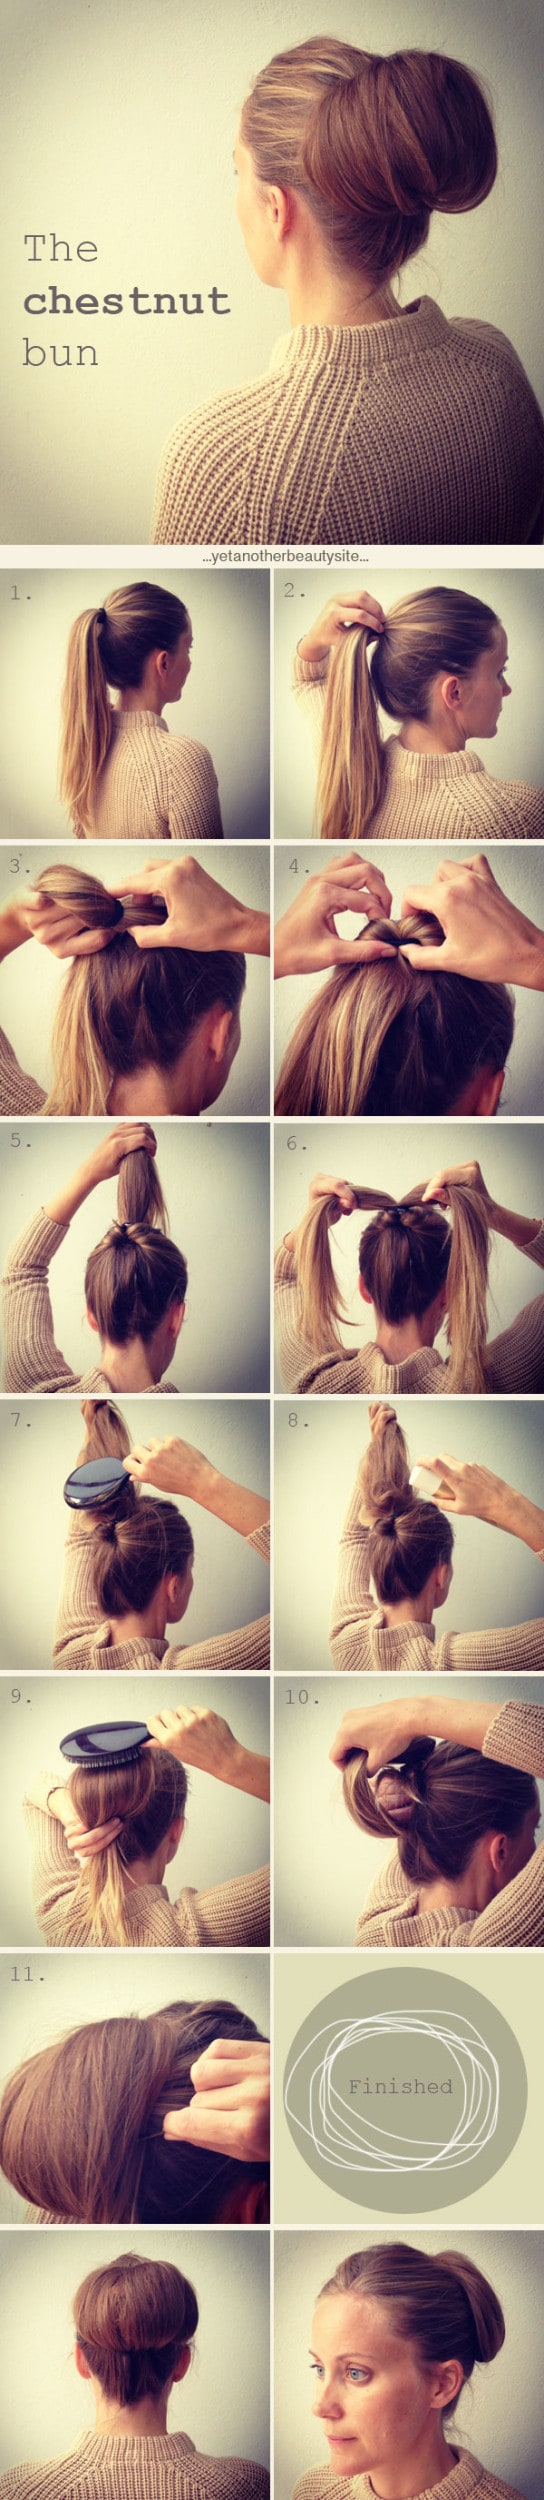 13 Fast DIY Hairstyle Tutorials For Everyday Use